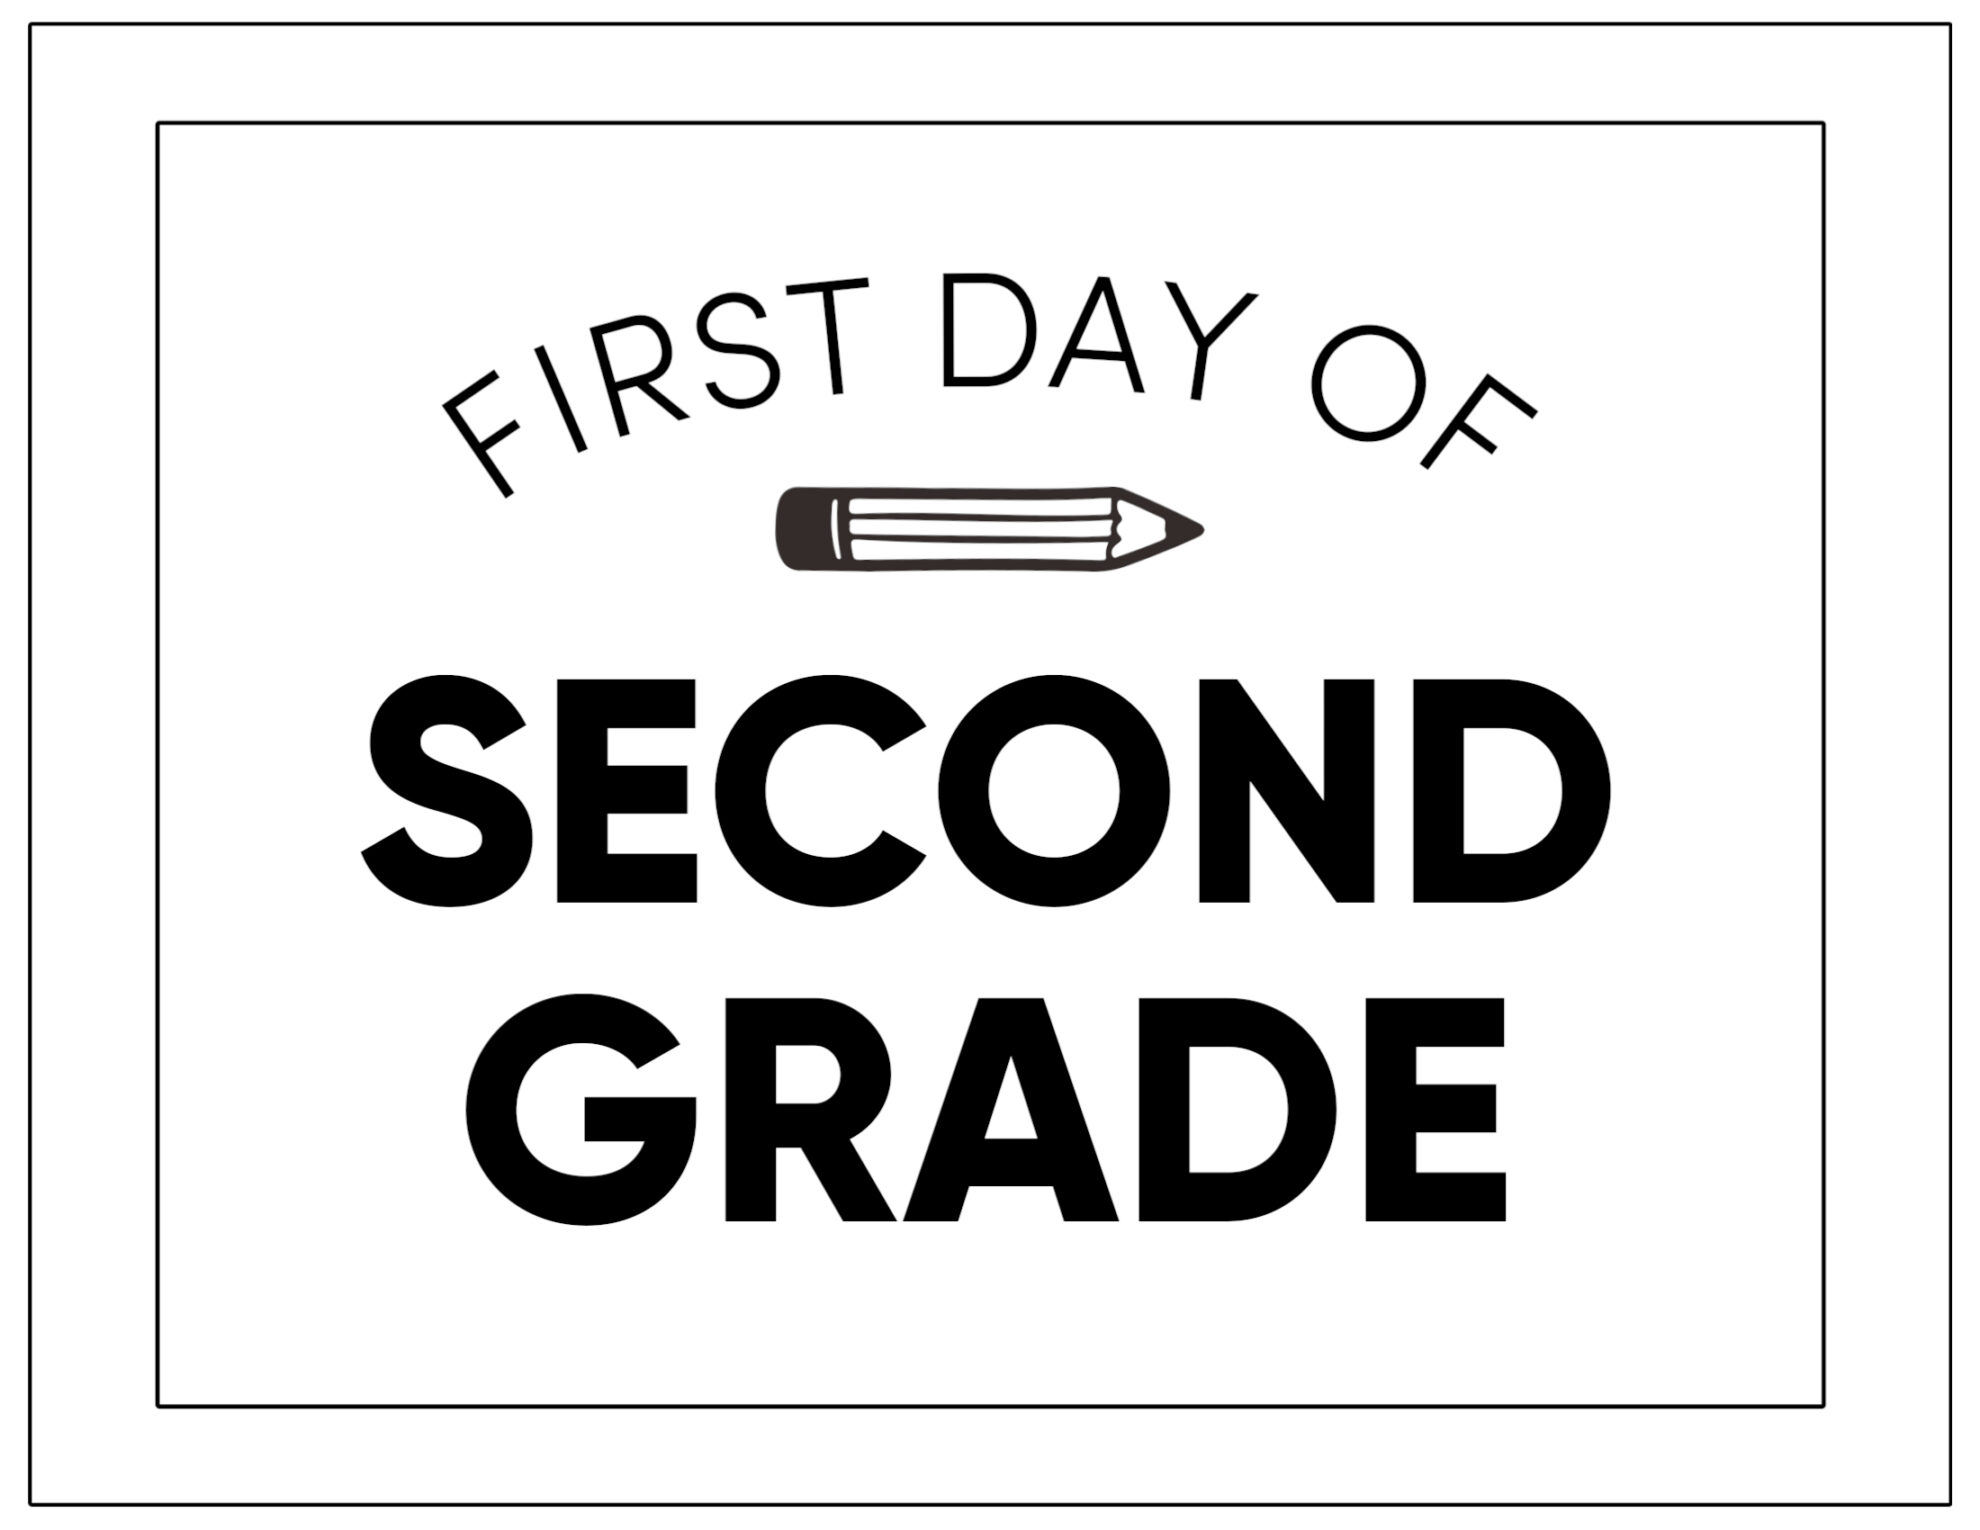 first-day-of-second-grade-sign-instant-download-first-day-of-school-printable-chalkboard-sign